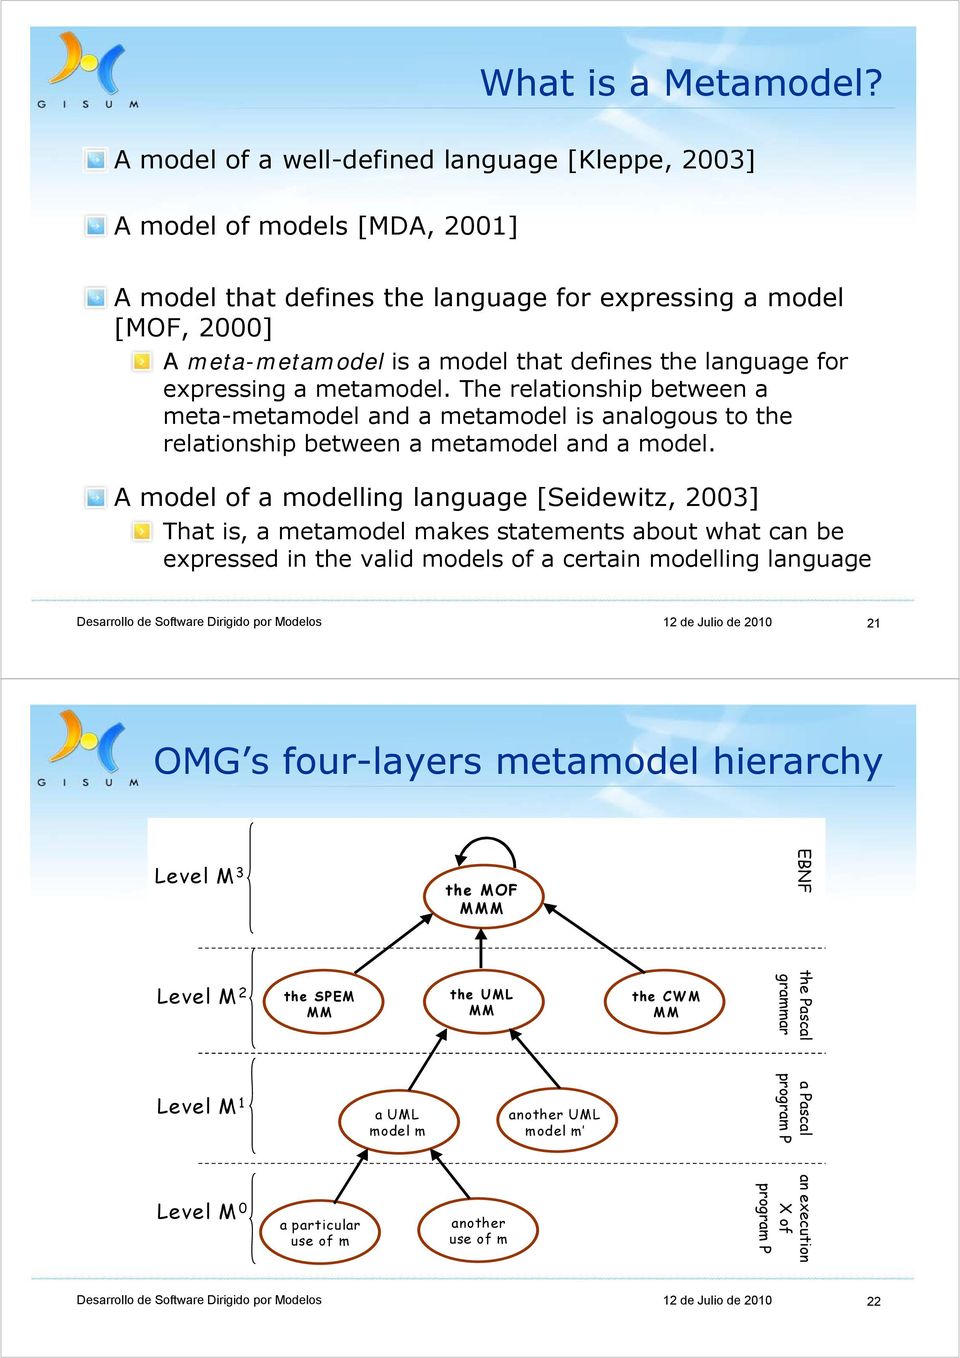 language for expressing a metamodel. The relationship between a meta-metamodel and a metamodel is analogous to the relationship between a metamodel and a model.